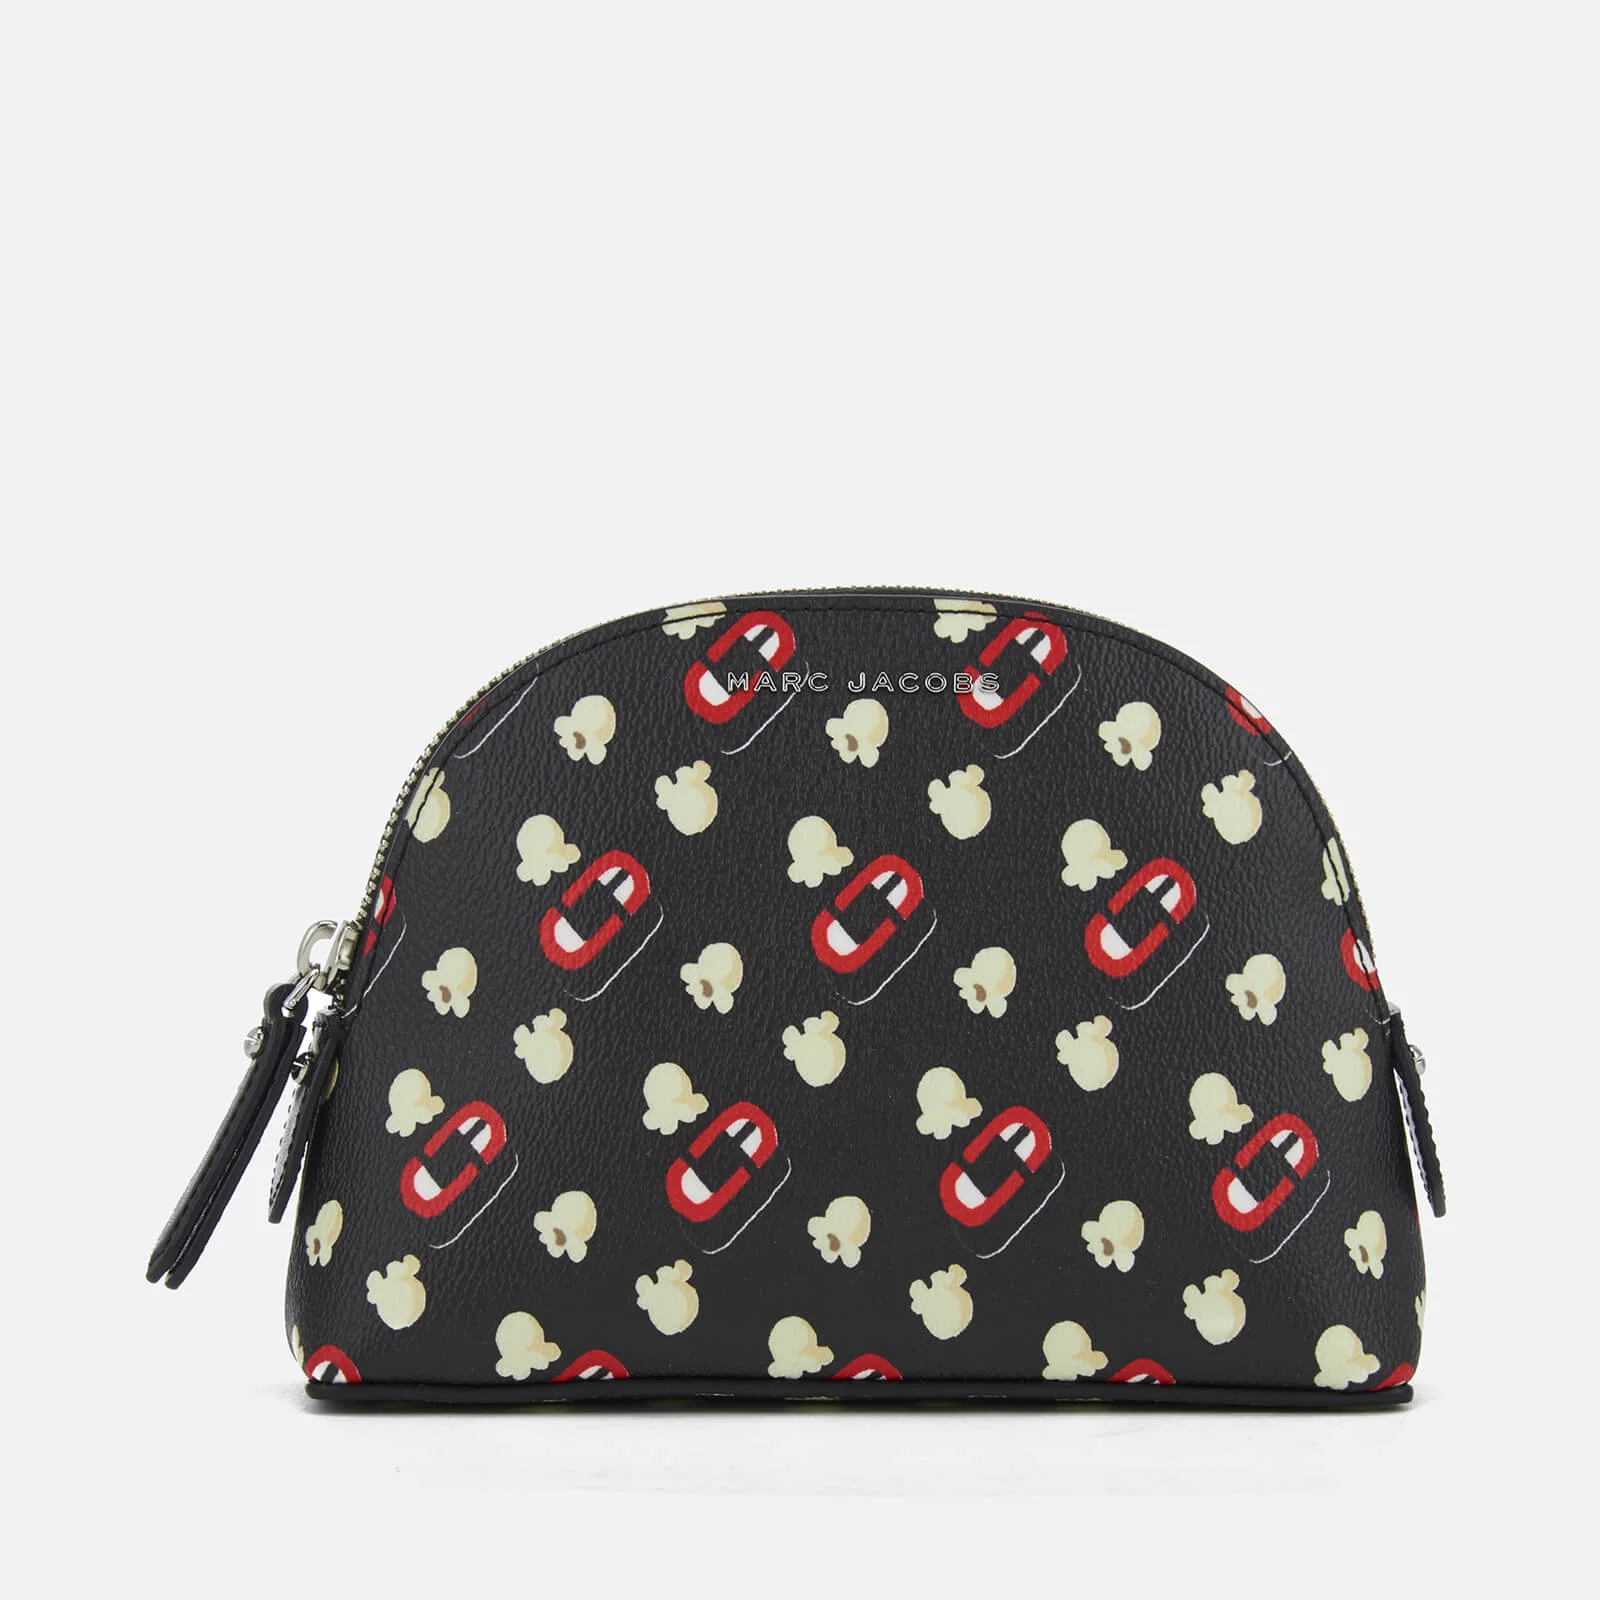 Marc Jacobs Women's Dome Cosmetic Bag - Black/Multi Image 1